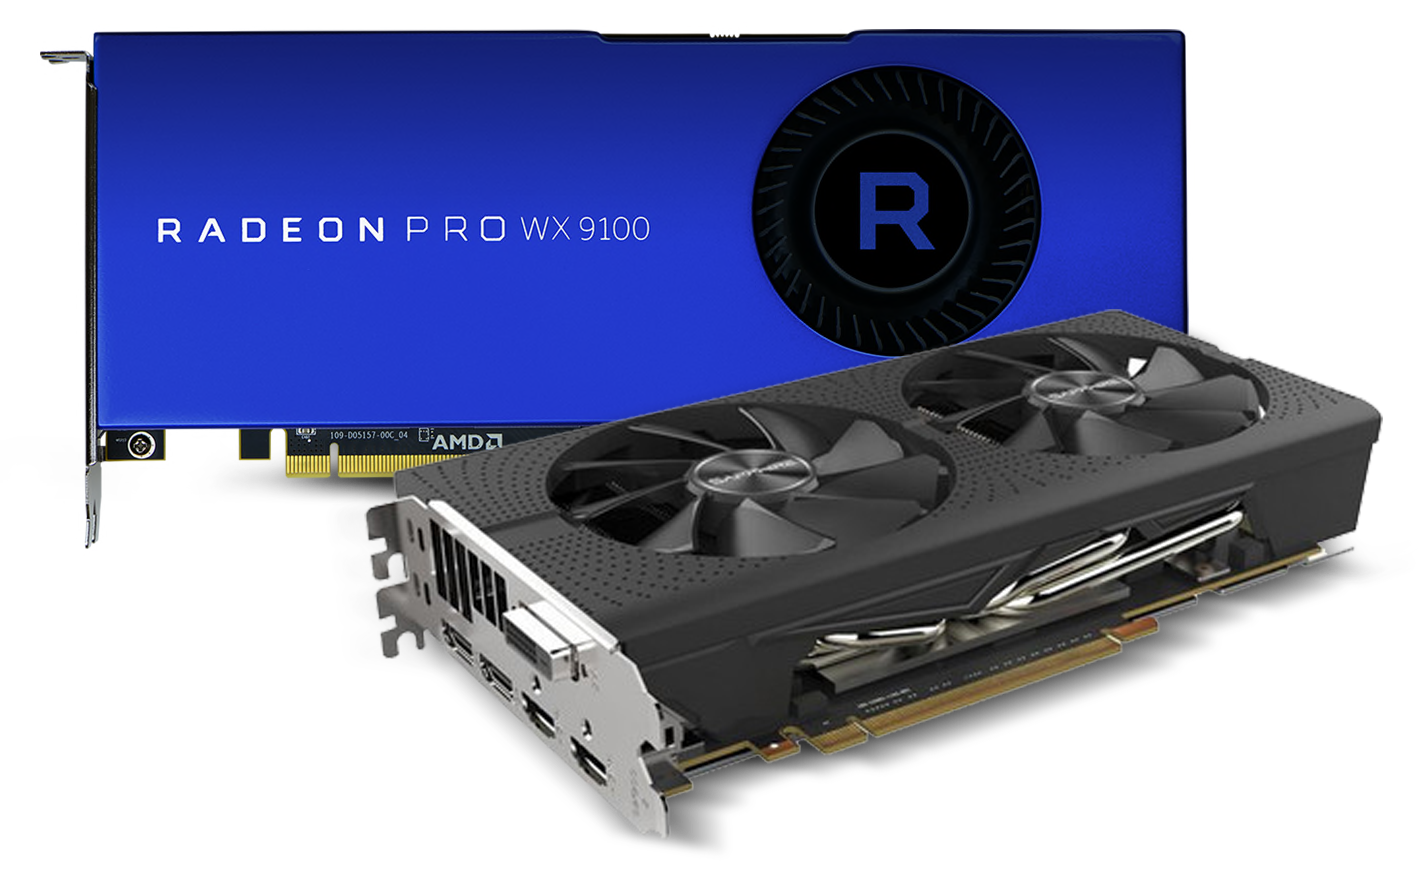 Radeon Pro WX 9100 and Radeon RX 580 Video Cards